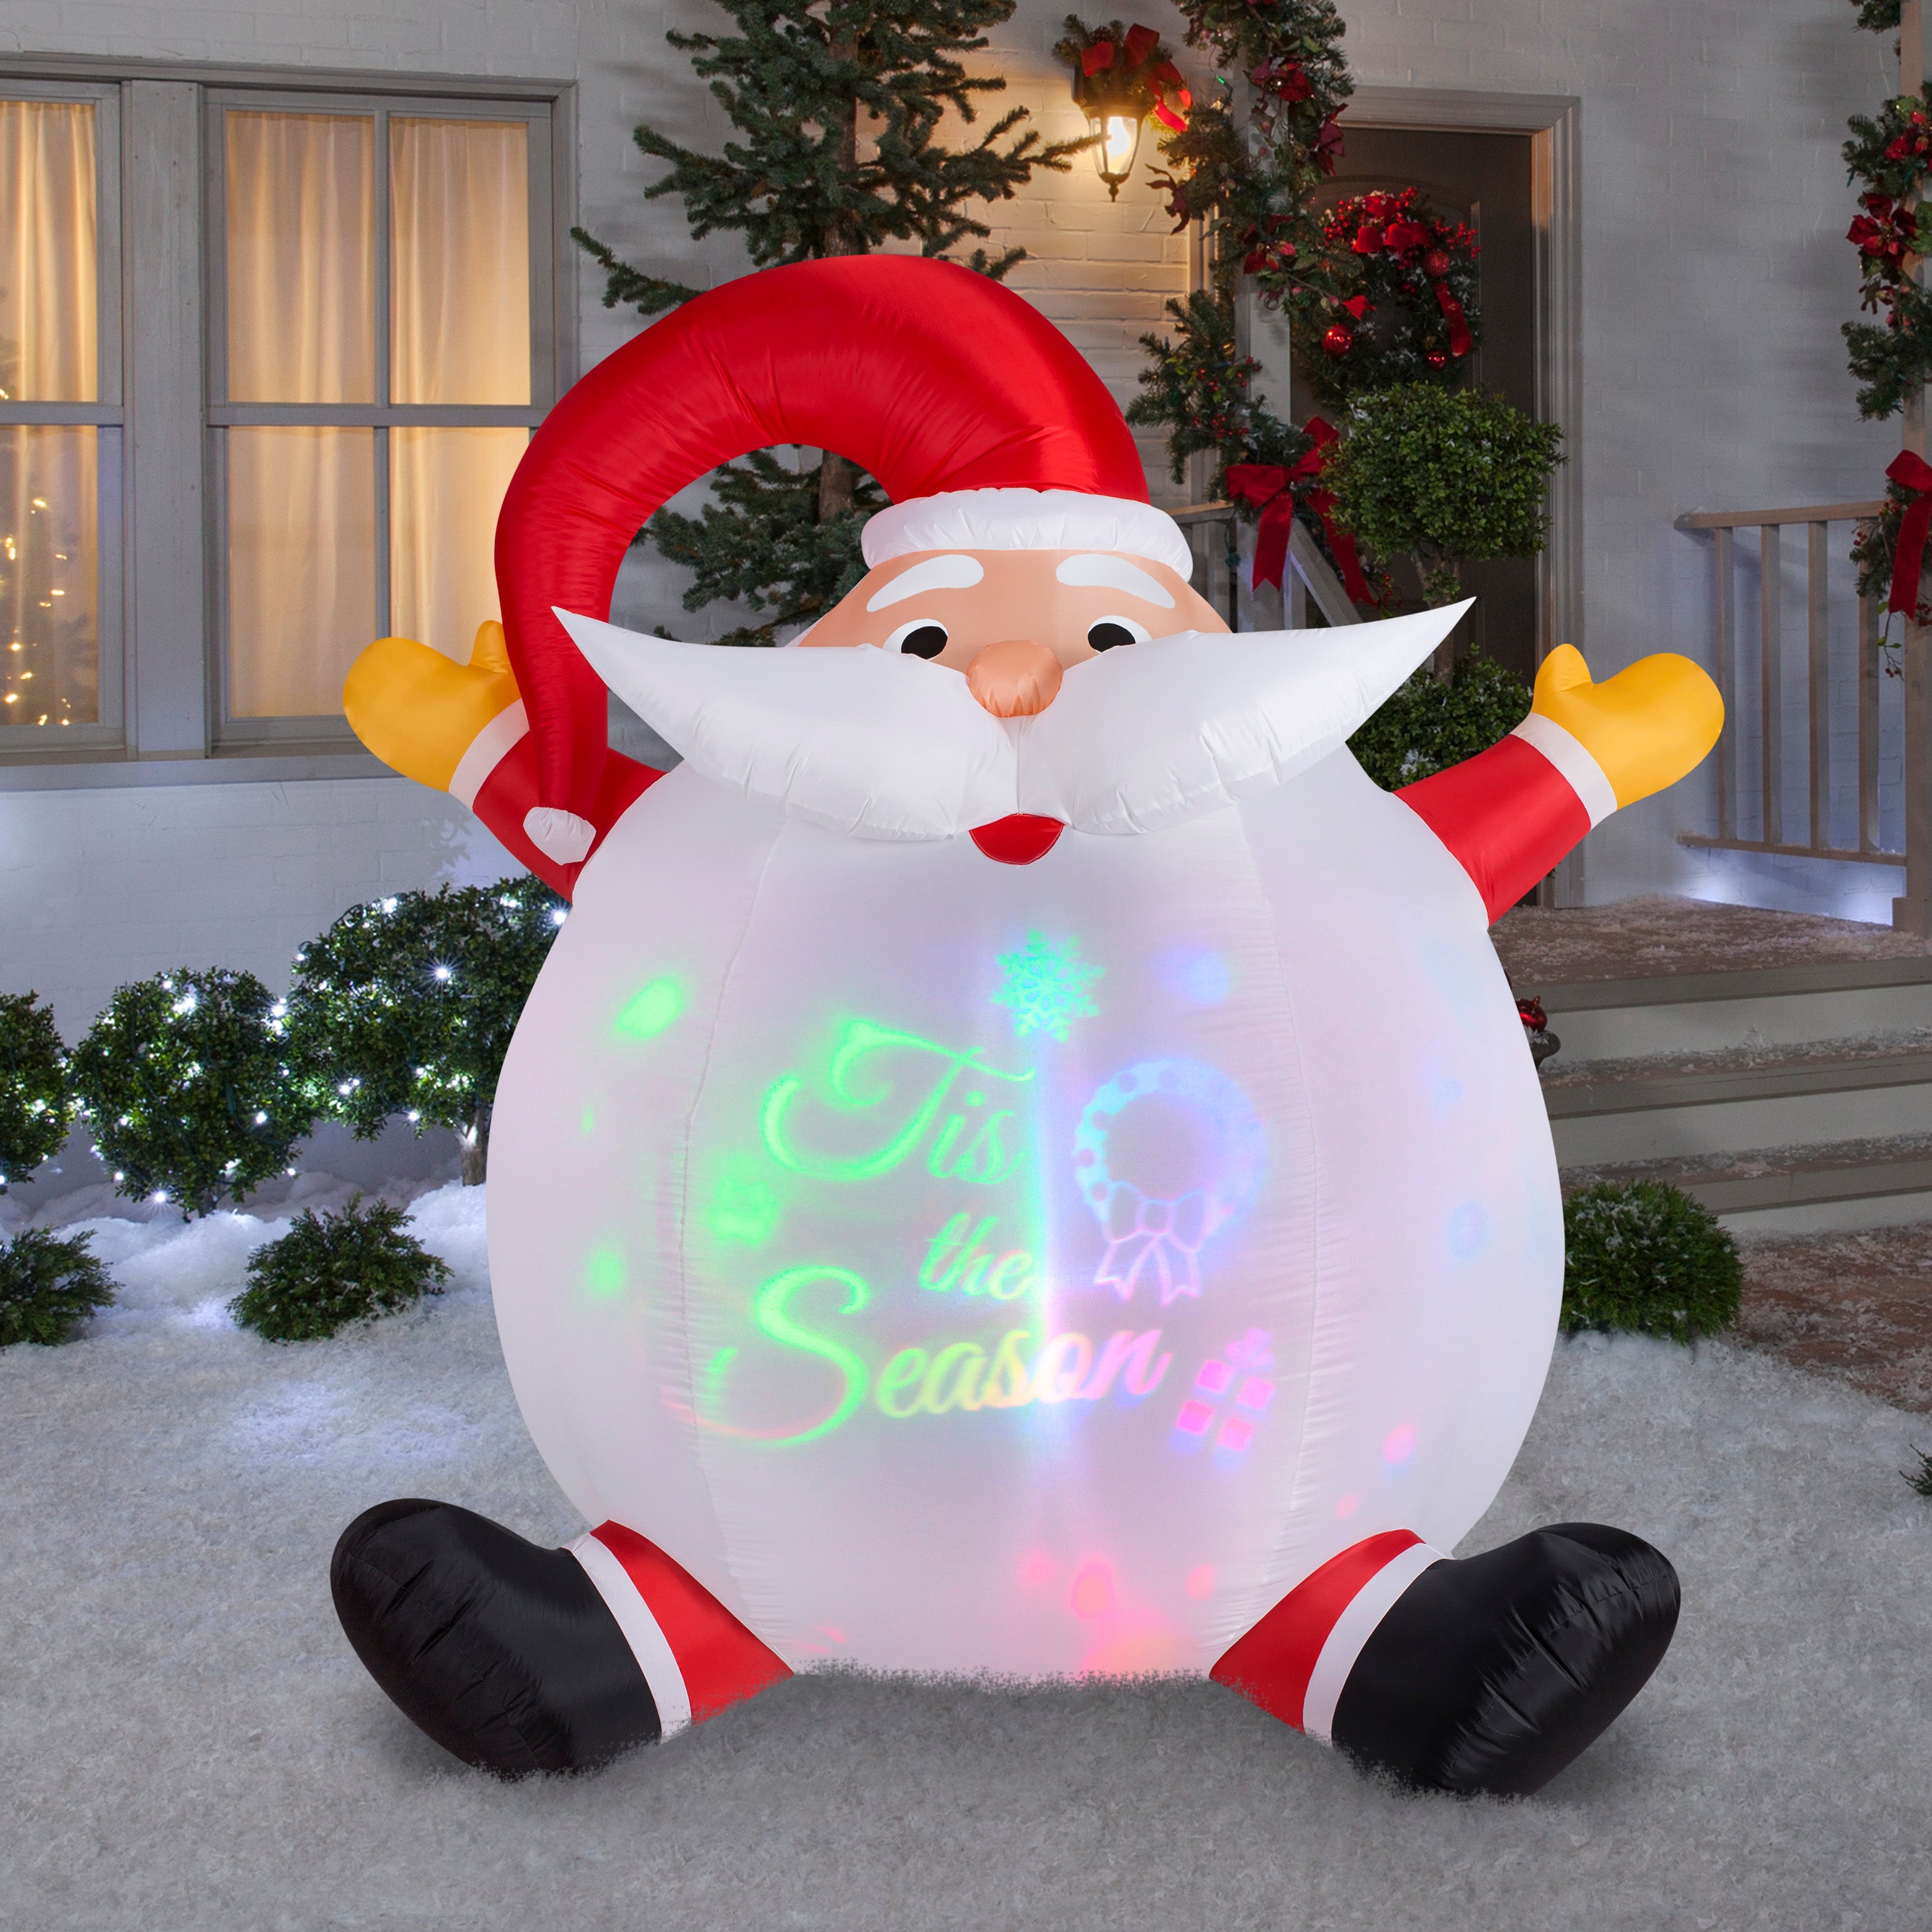 6' Panoramic Projection Airblown Santa Christmas Inflatable